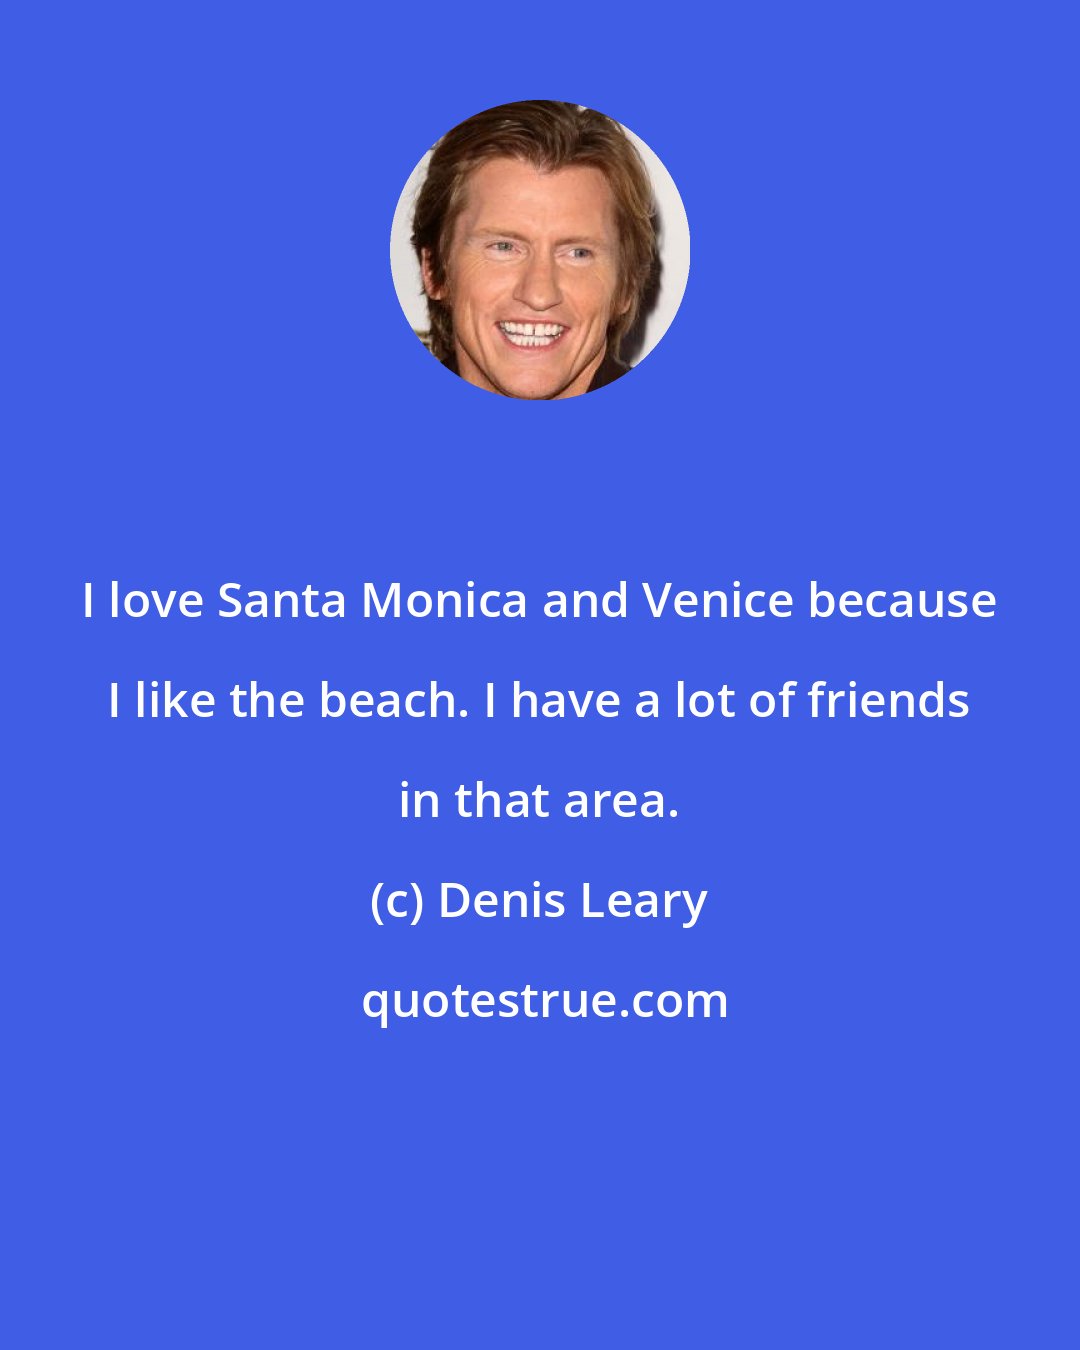 Denis Leary: I love Santa Monica and Venice because I like the beach. I have a lot of friends in that area.